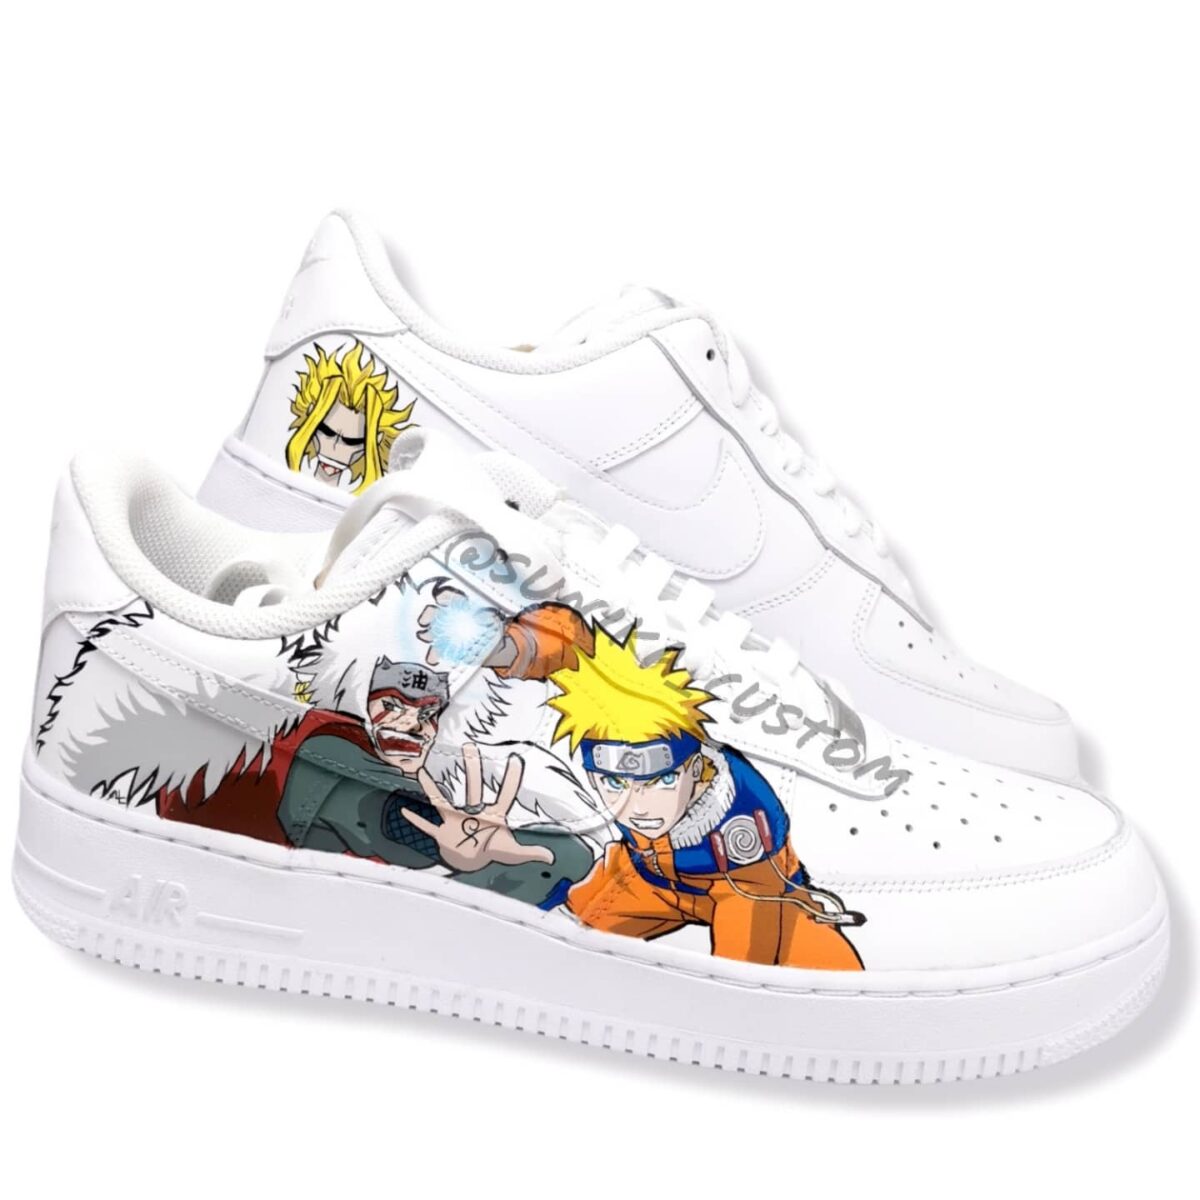 Naruto x My hero academia Air Force 1 Custom, Personalized Shoes ...